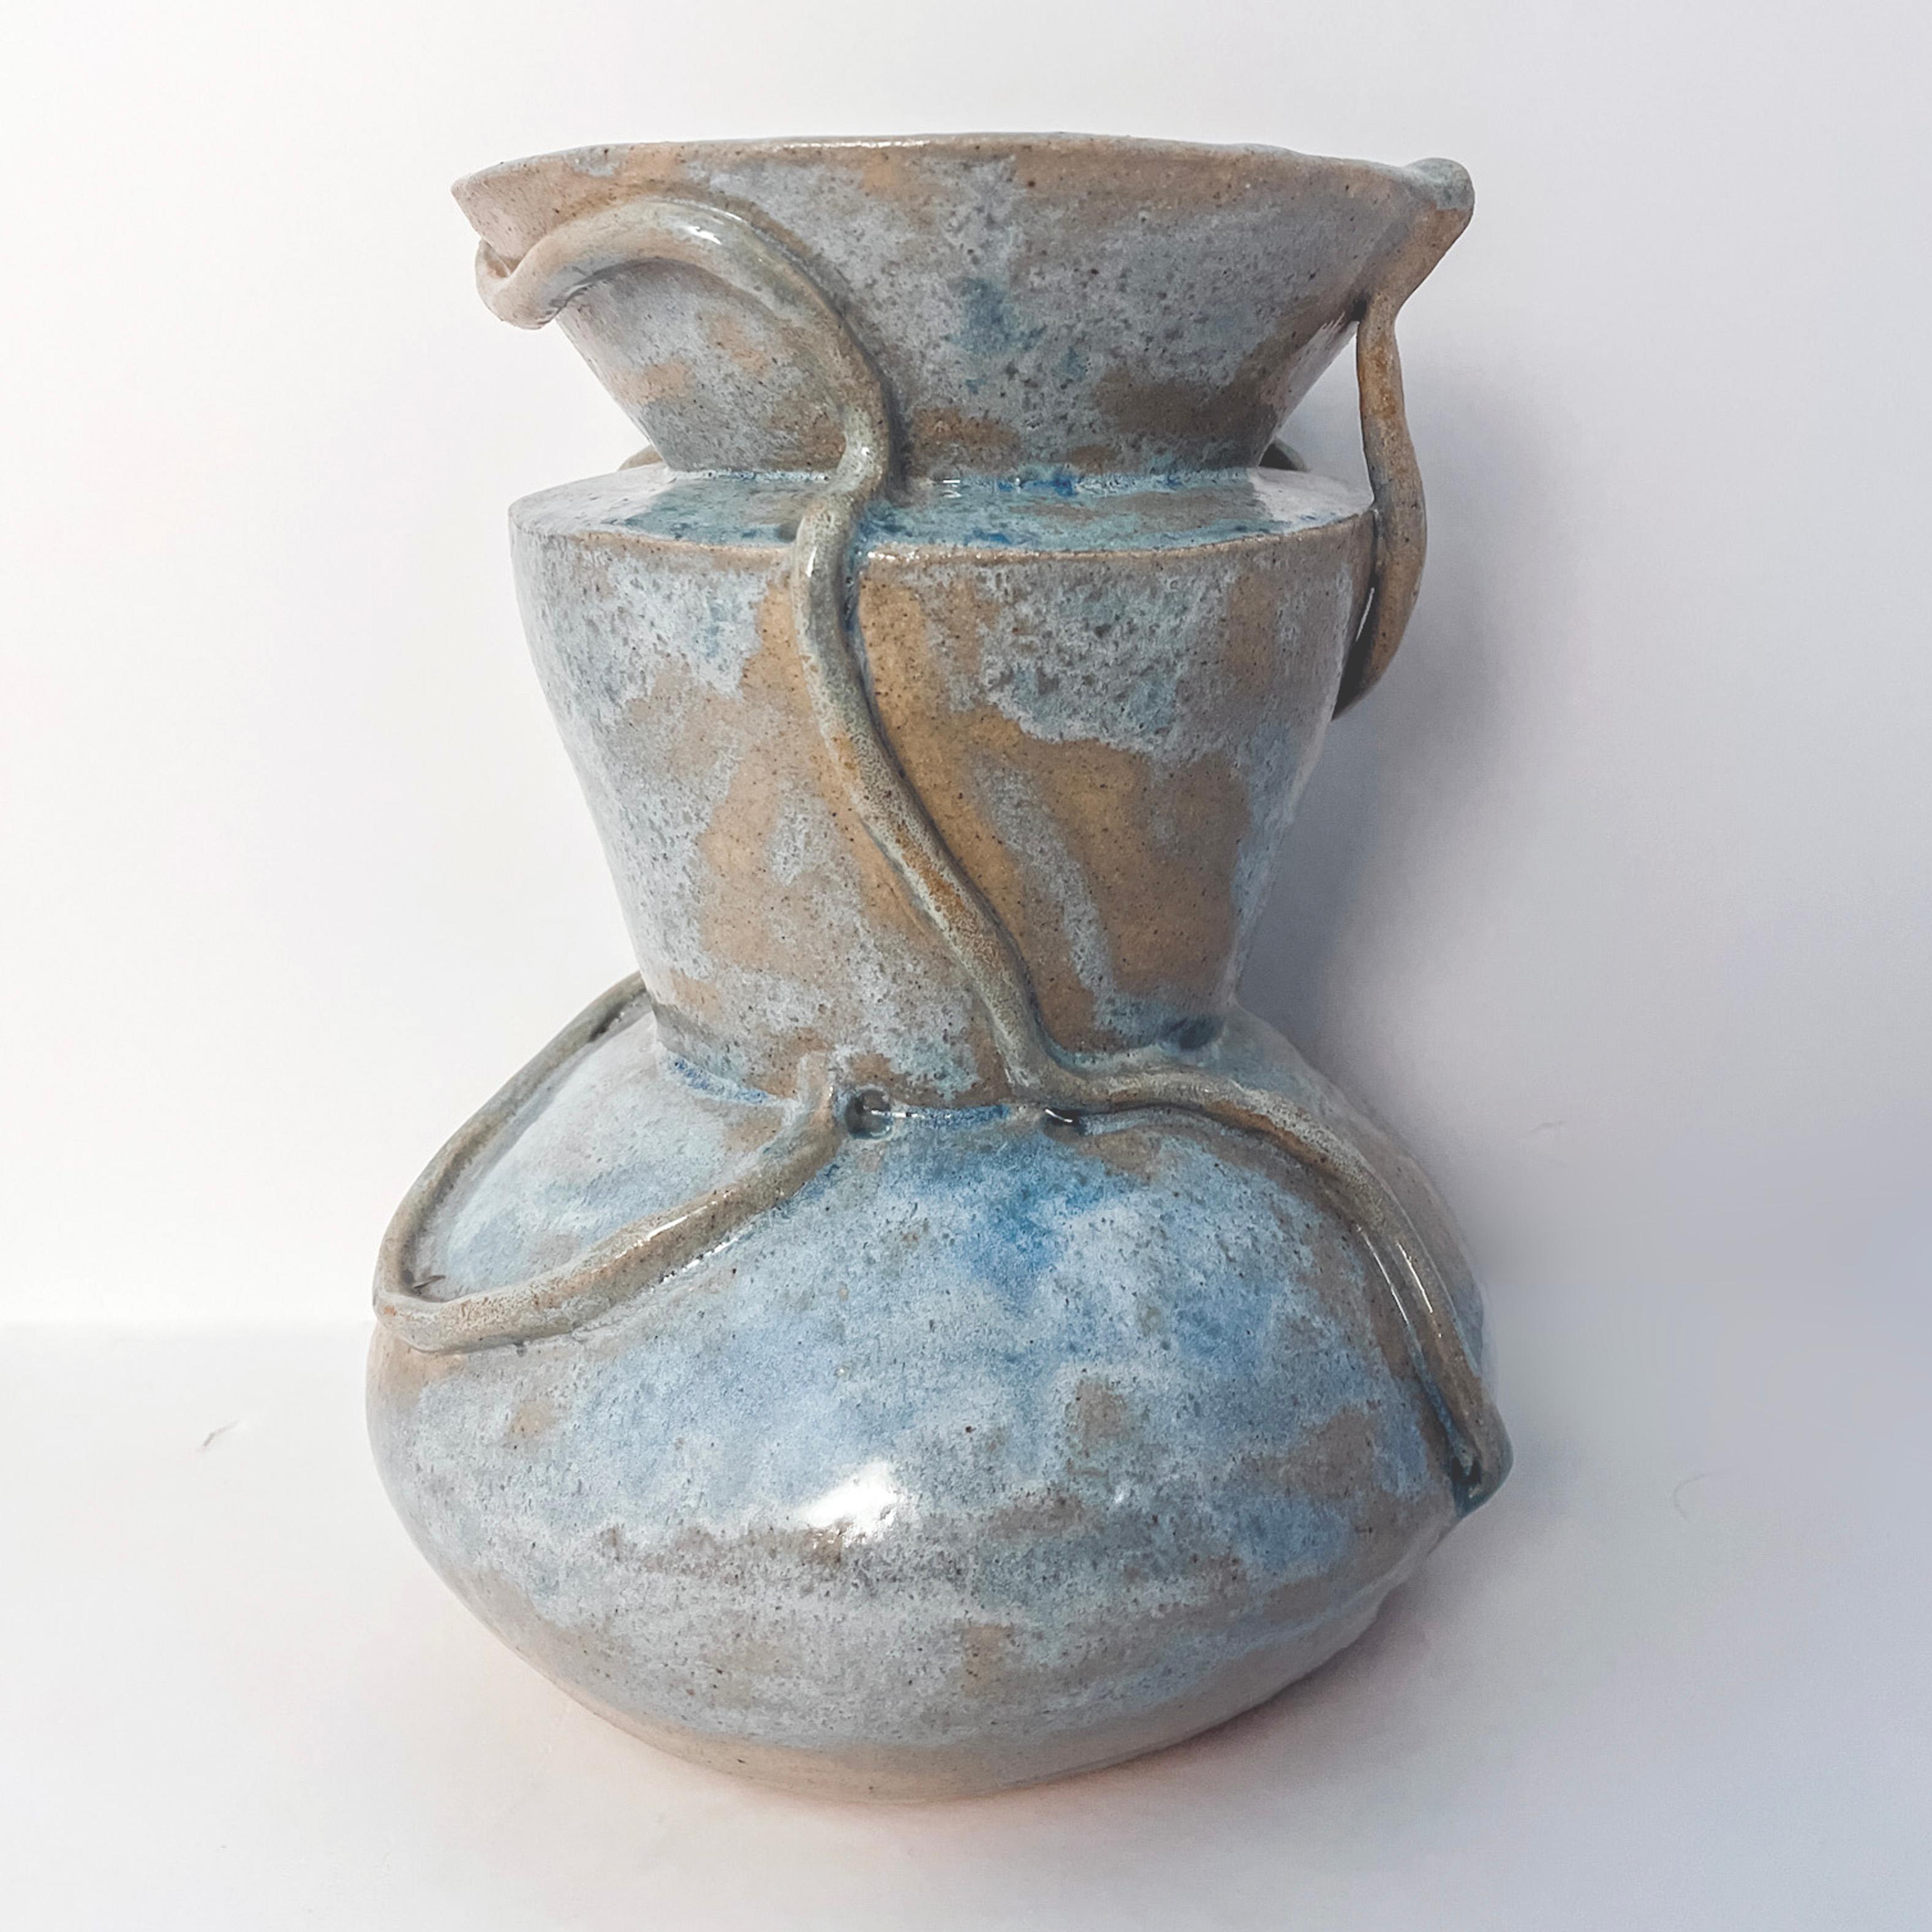 A modern sculptural vase handcrafted in Raku clay and a variegated opal glaze. It It is rich in texture and the glossy blue color against the earthy undertones brings interest to this piece. It is water tight and ready for your floral or plant